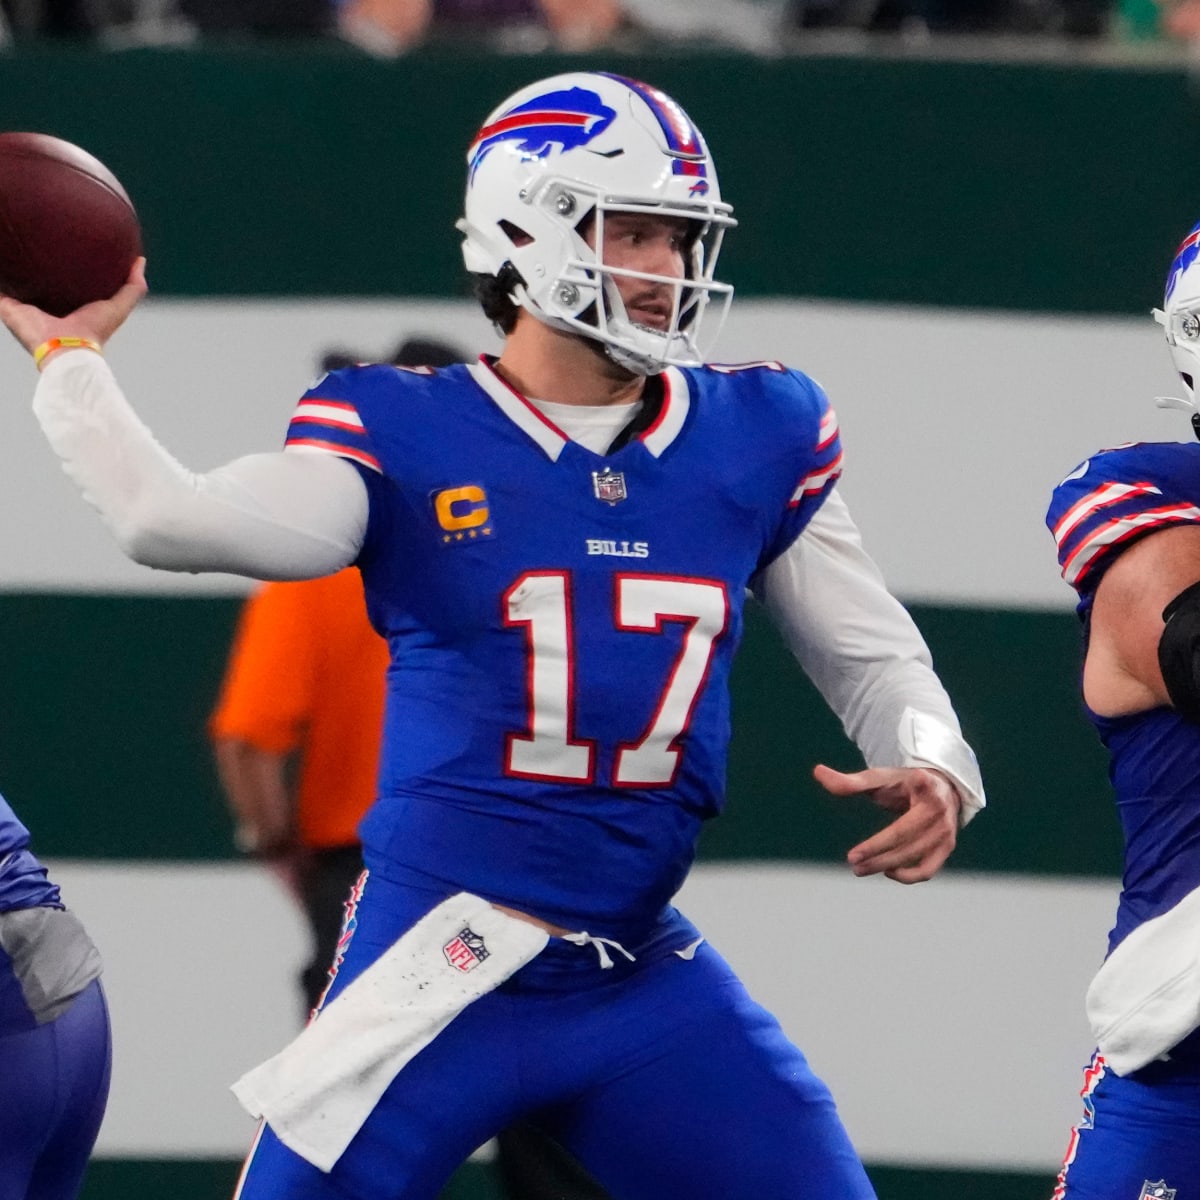 Breaking Down The Buffalo Bills Week 1 Loss to the New York Jets